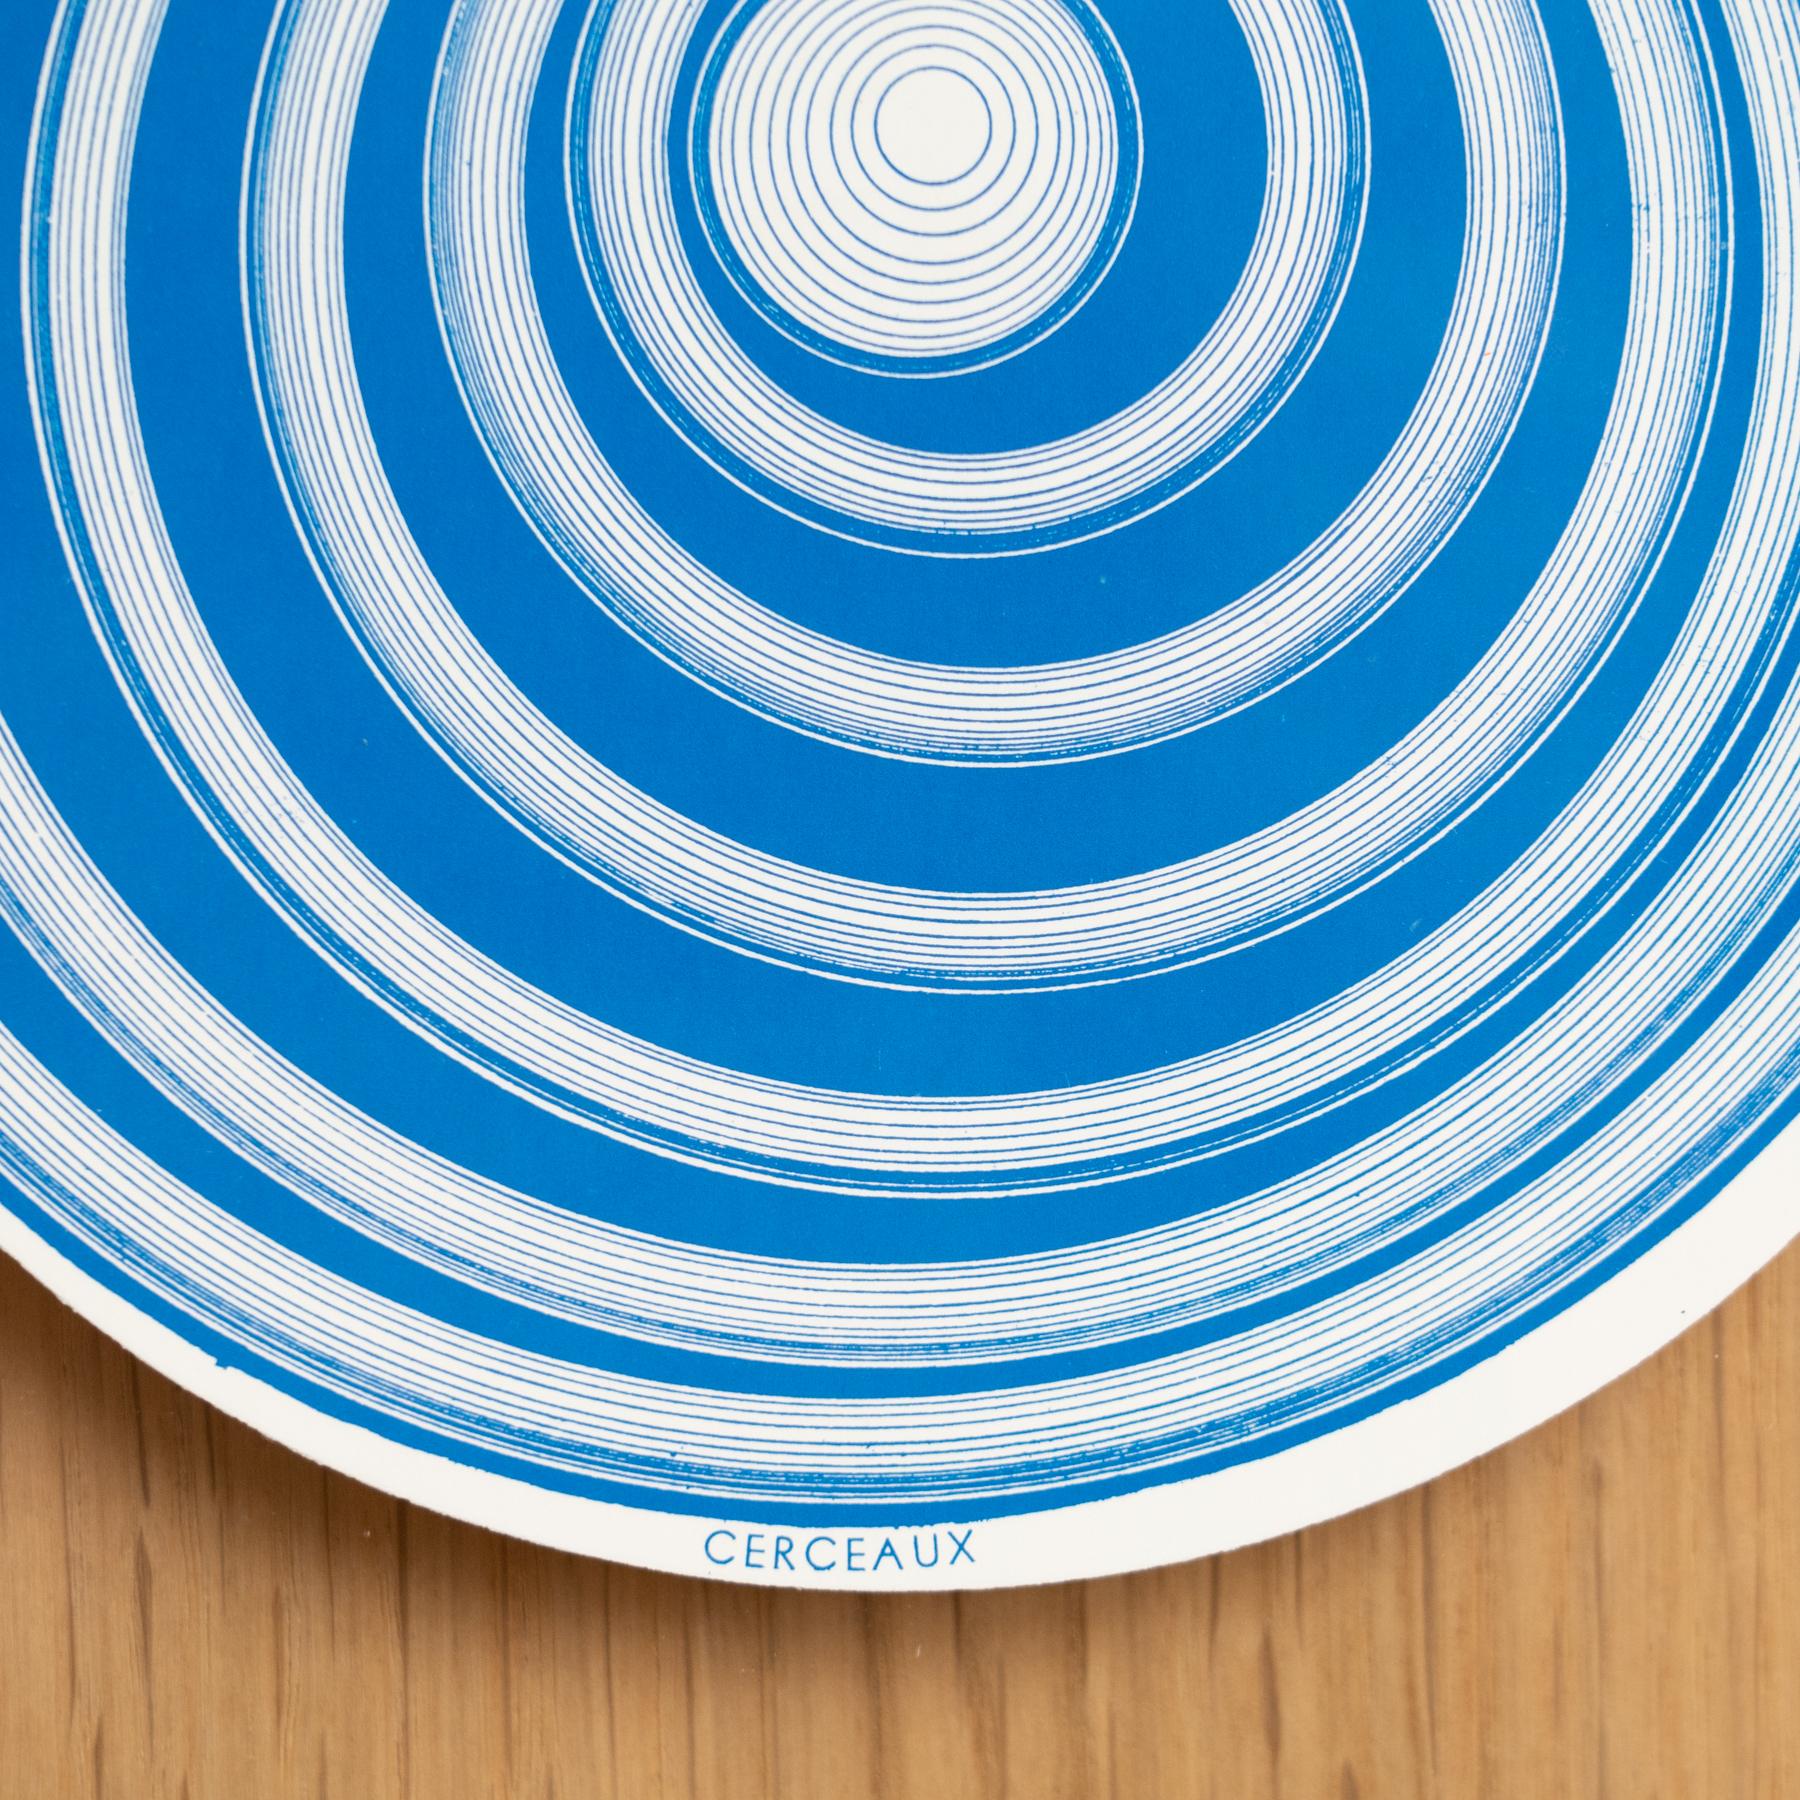 Paper Marcel Duchamp Blue and White Cerceaux Rotorelief by Konig Series 133, 1987 For Sale